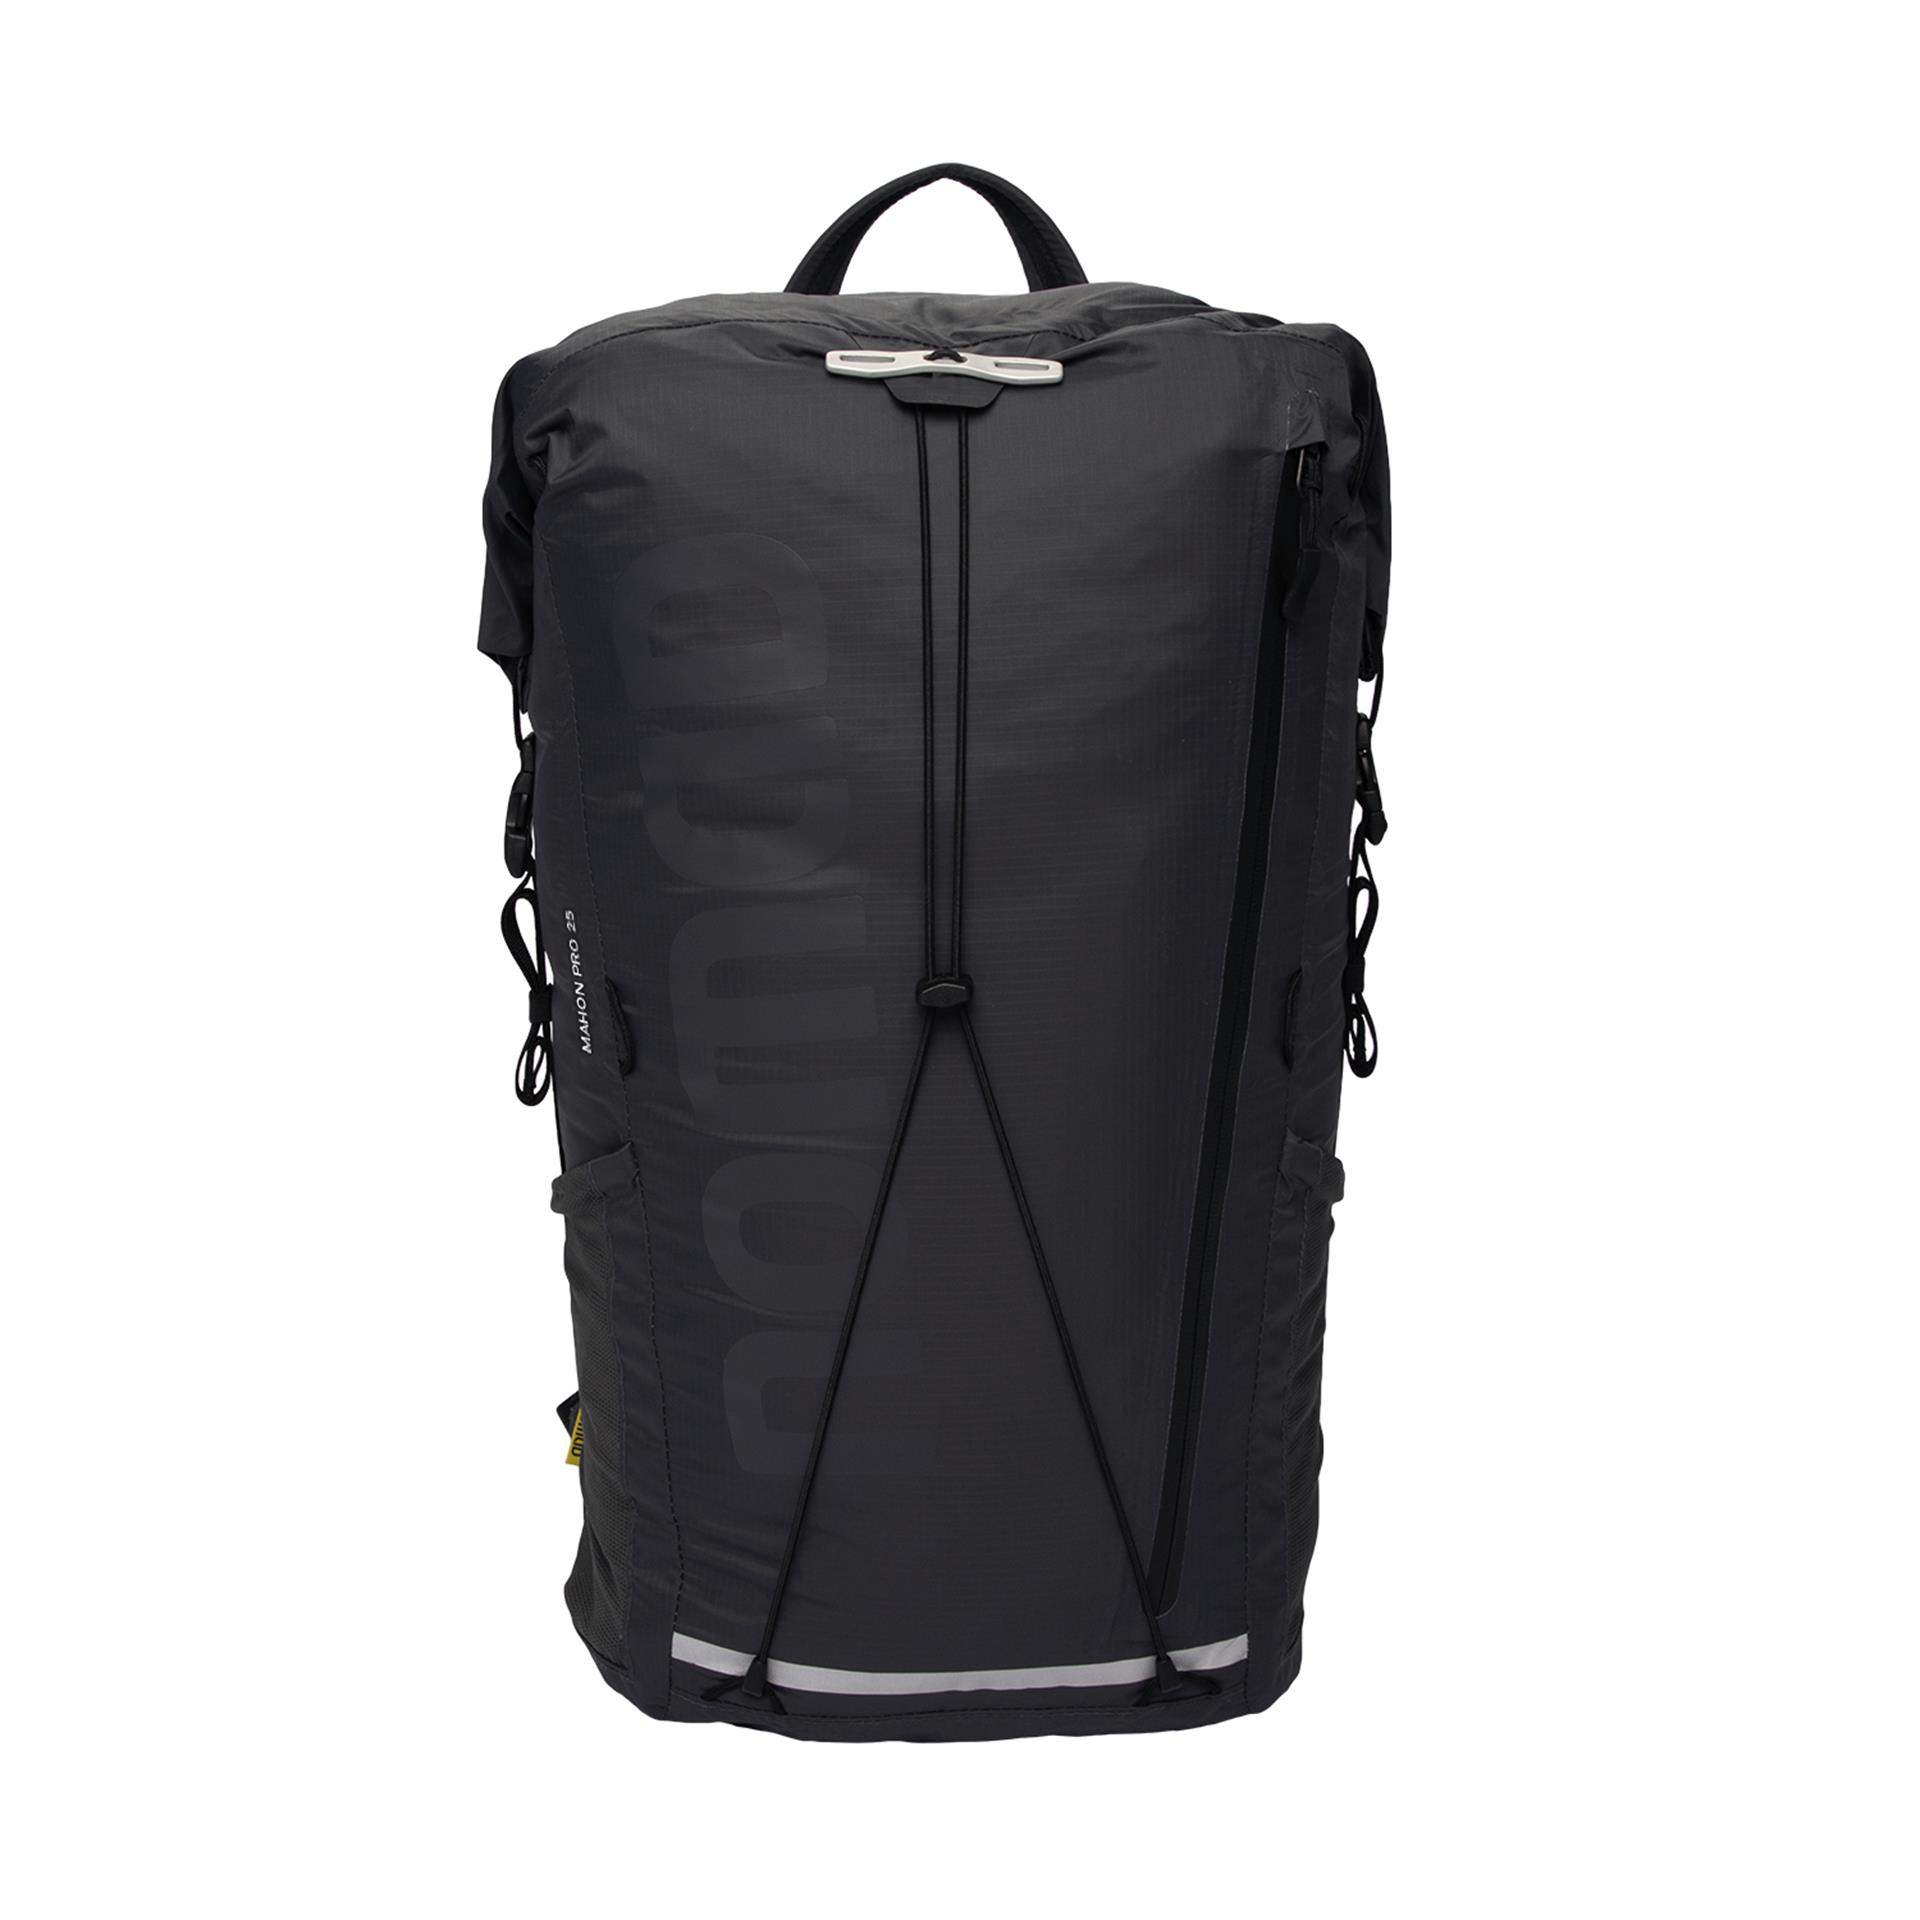 Nomad Mahon Pro 25 hiking daypack Black | Camping Outdoor